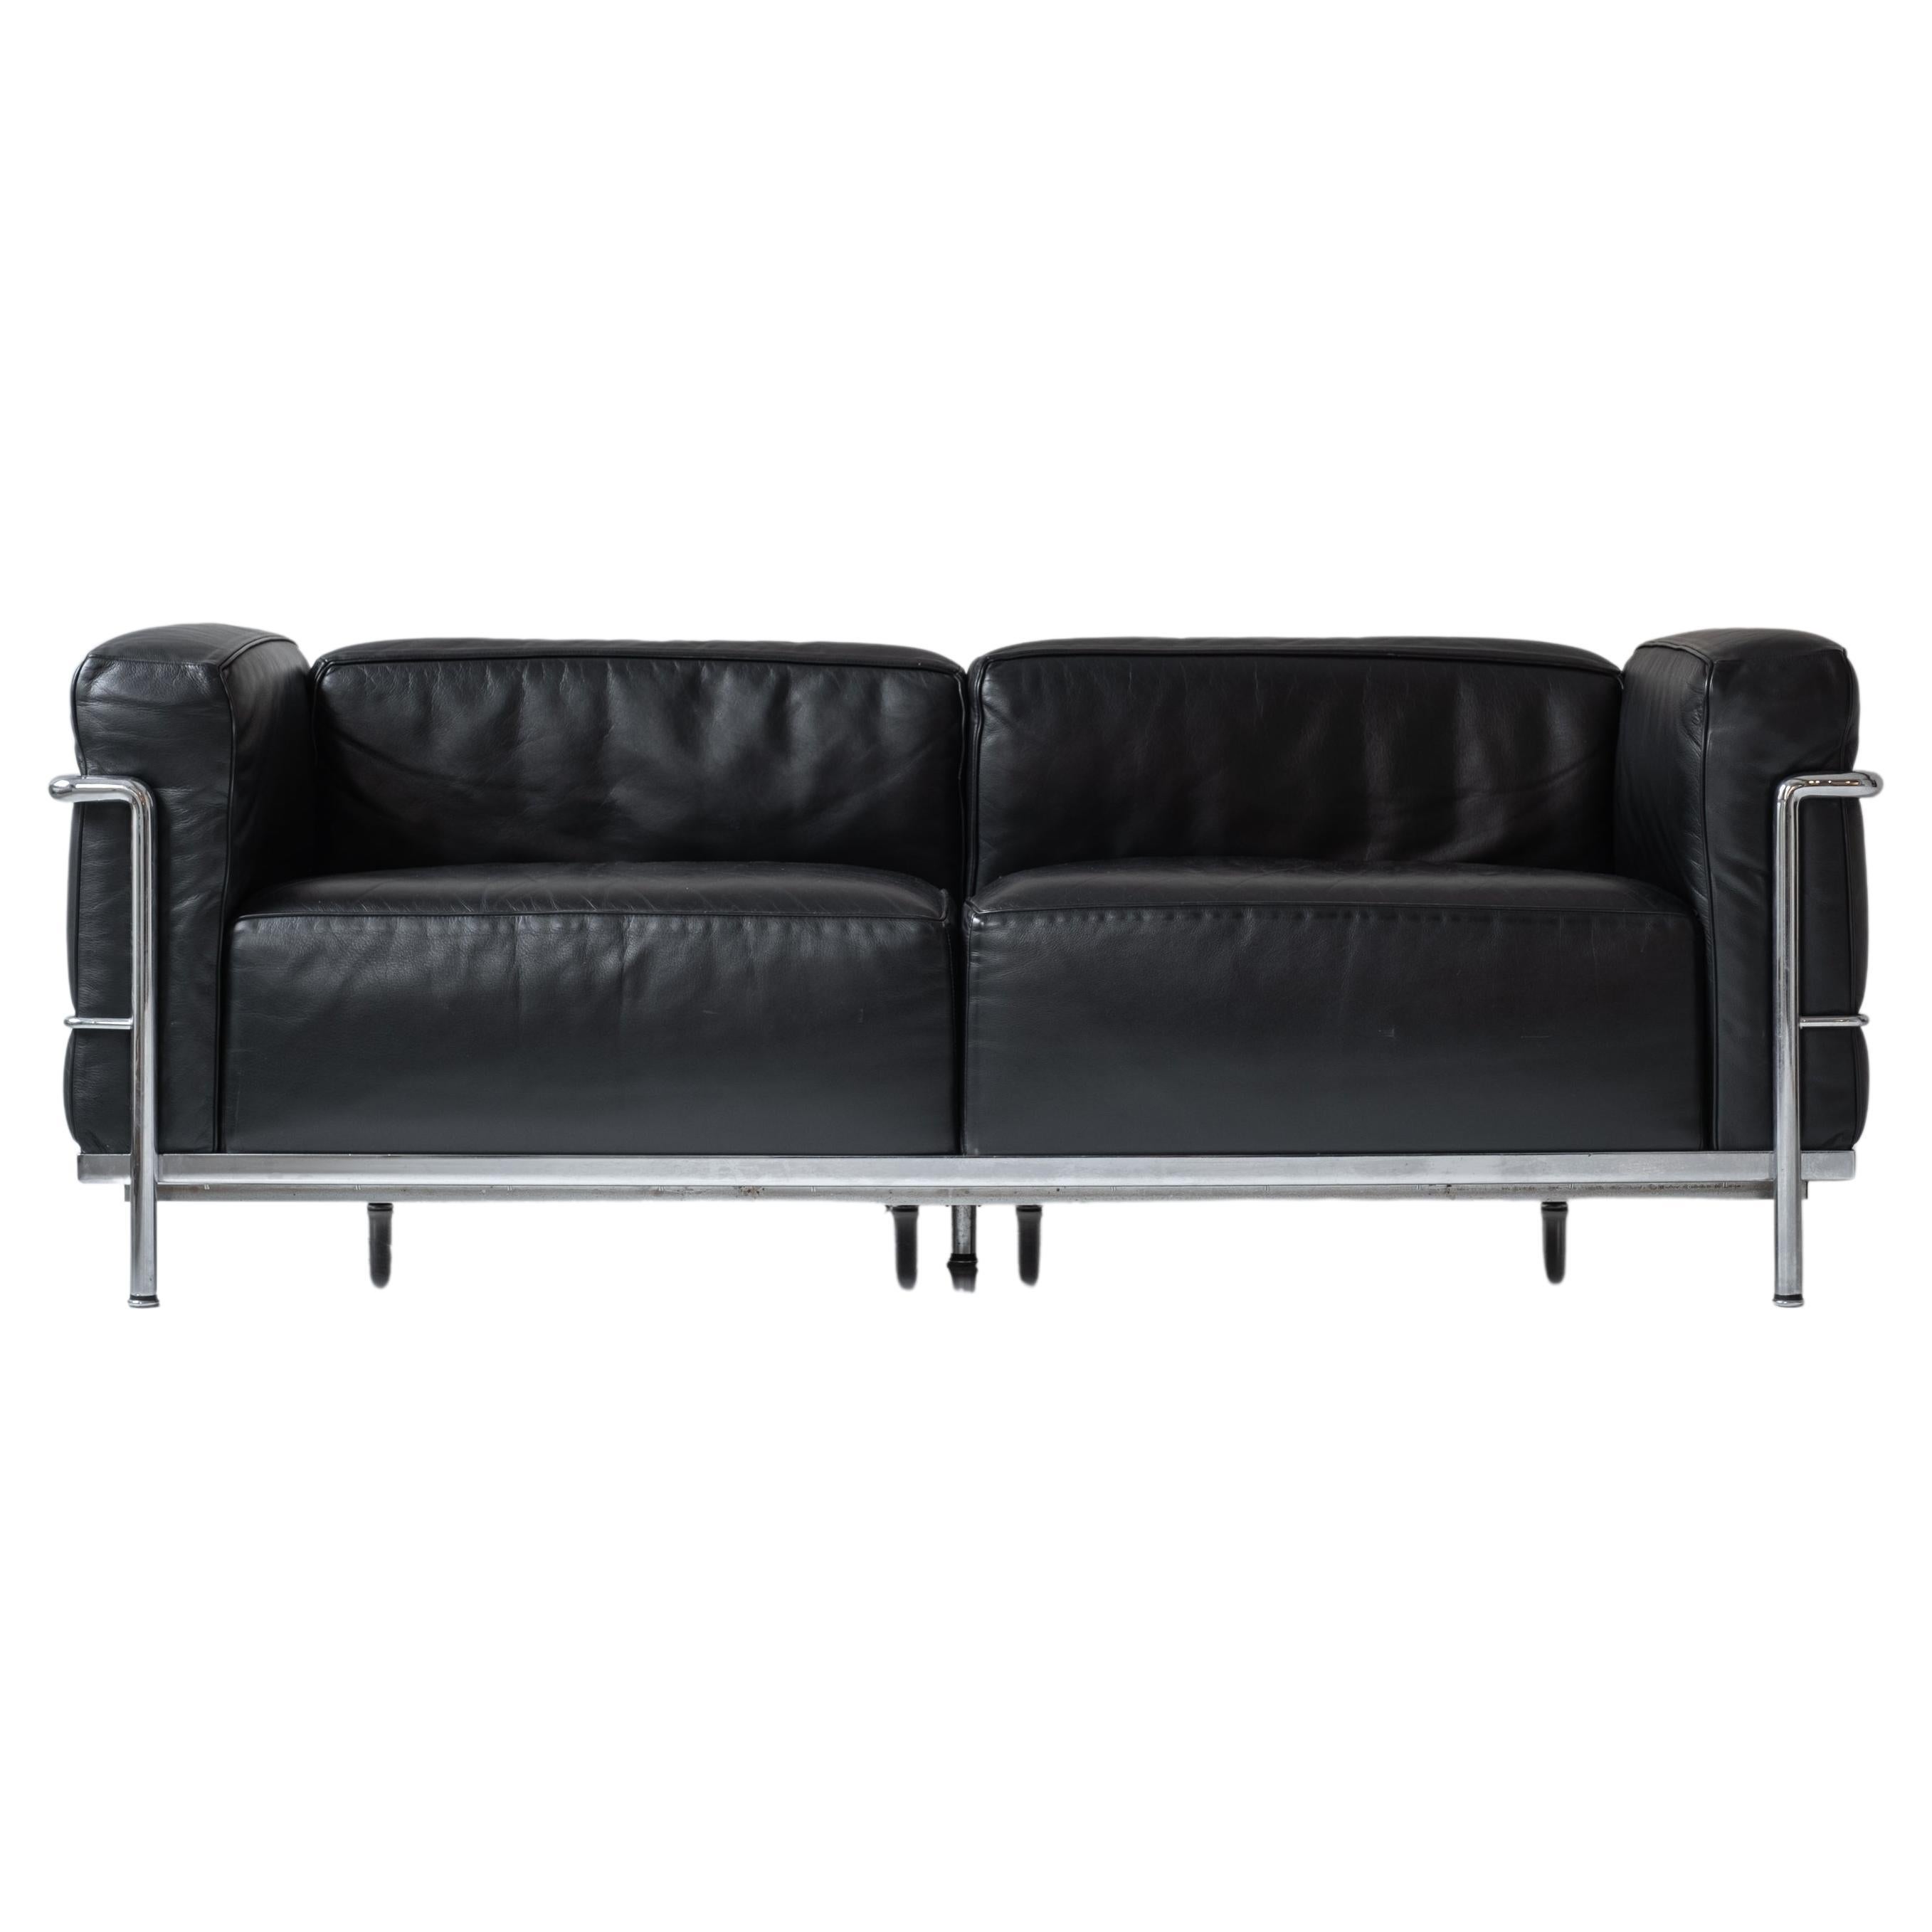 ‘LC3’ Sofa by Le Corbusier, Pierre Jeanneret and Charlotte Perriand for Cassina